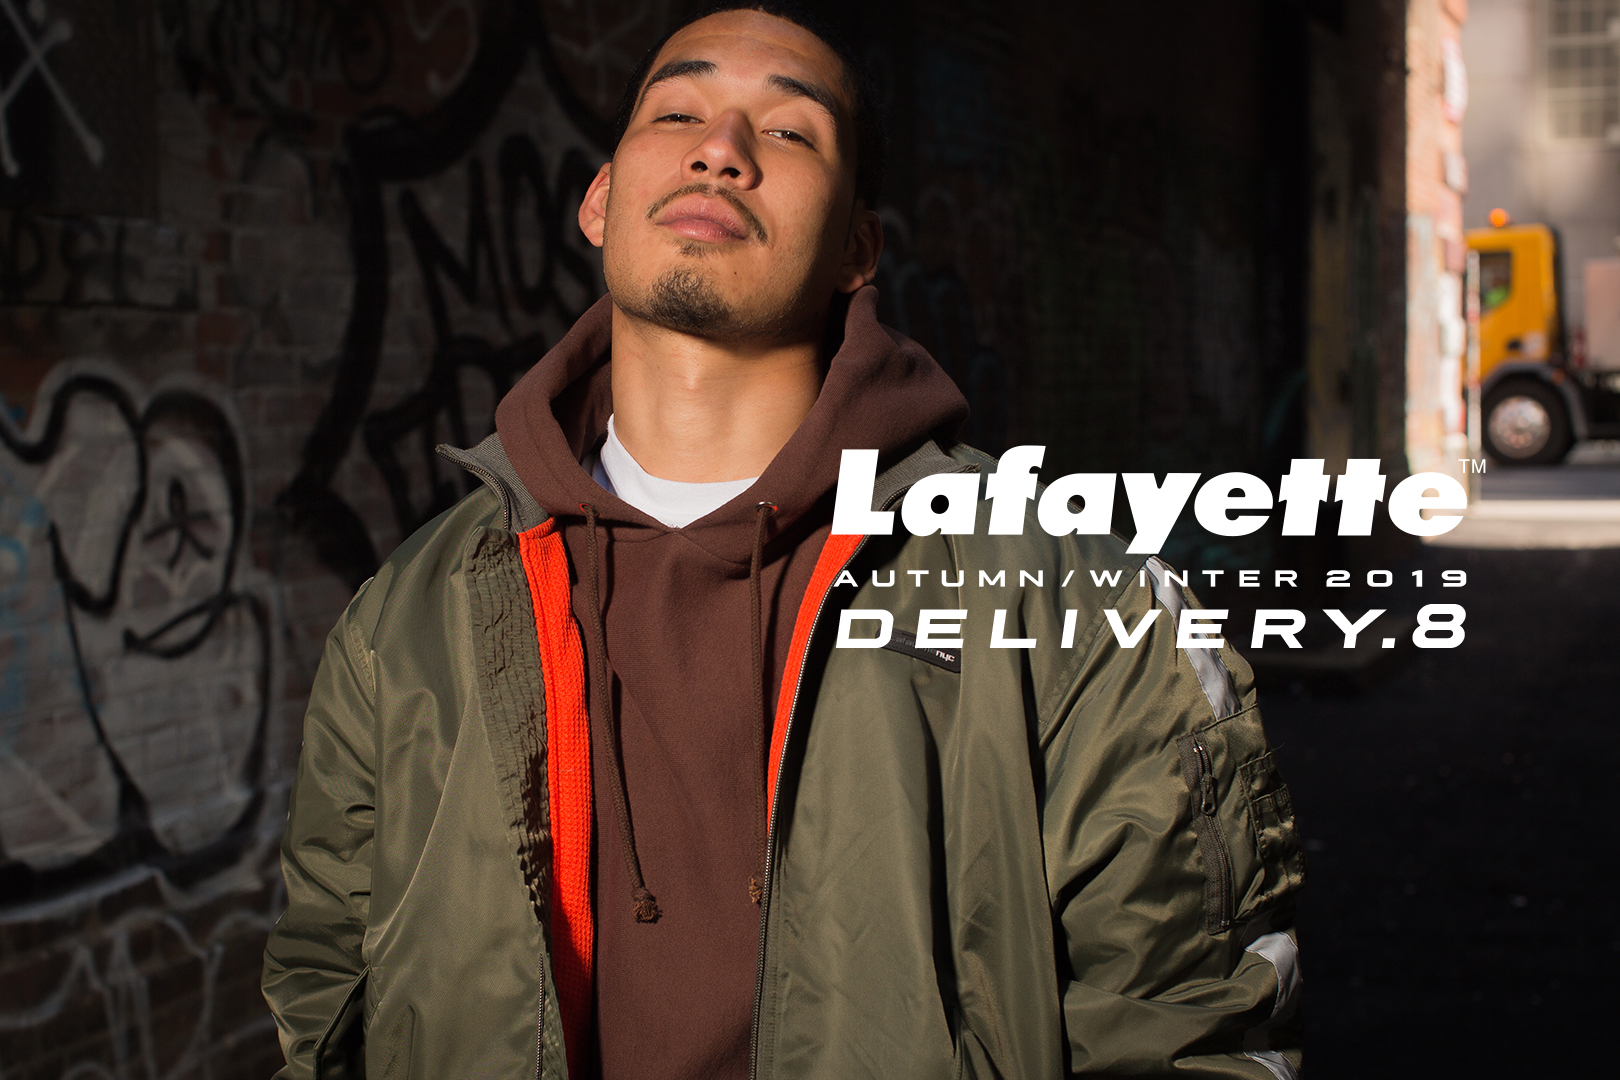 Lafayette 2019 Autumn/Winter Collection Delivery.8